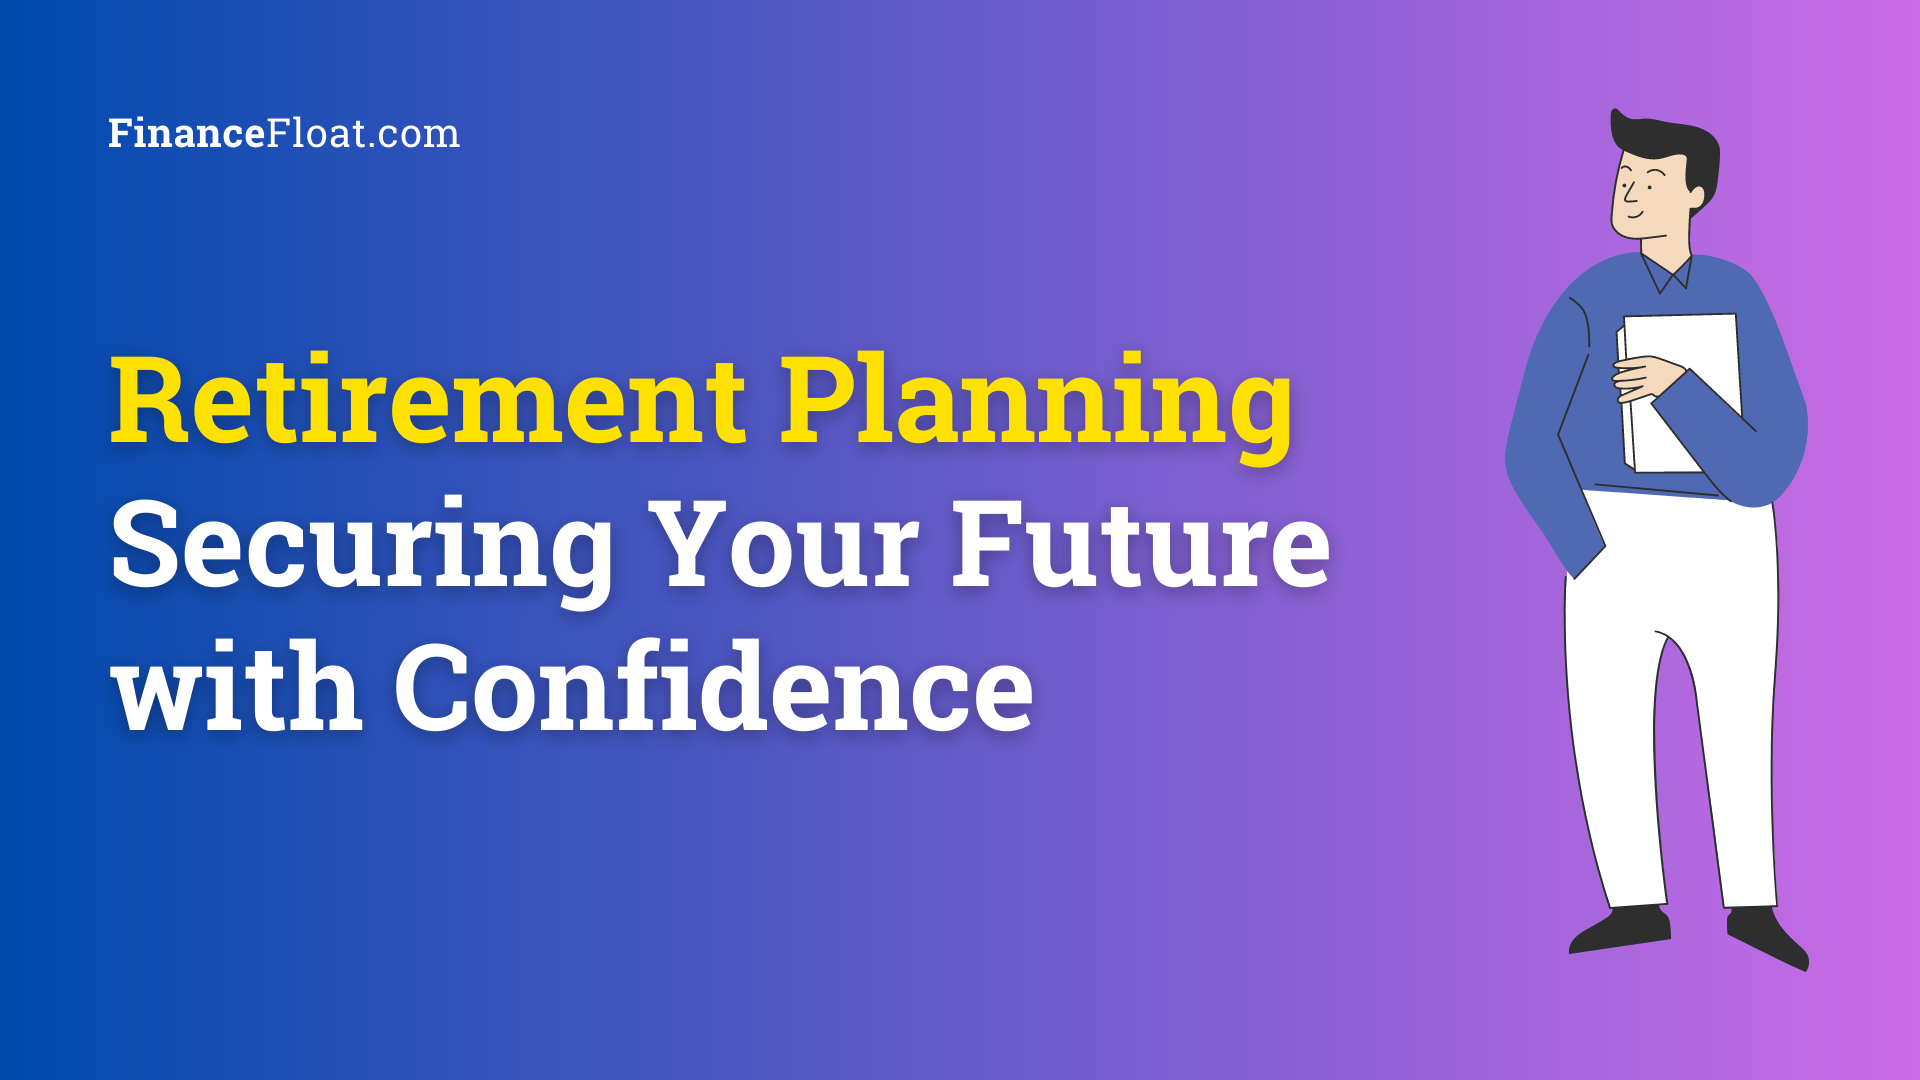 Retirement Planning Securing Your Future with Confidence